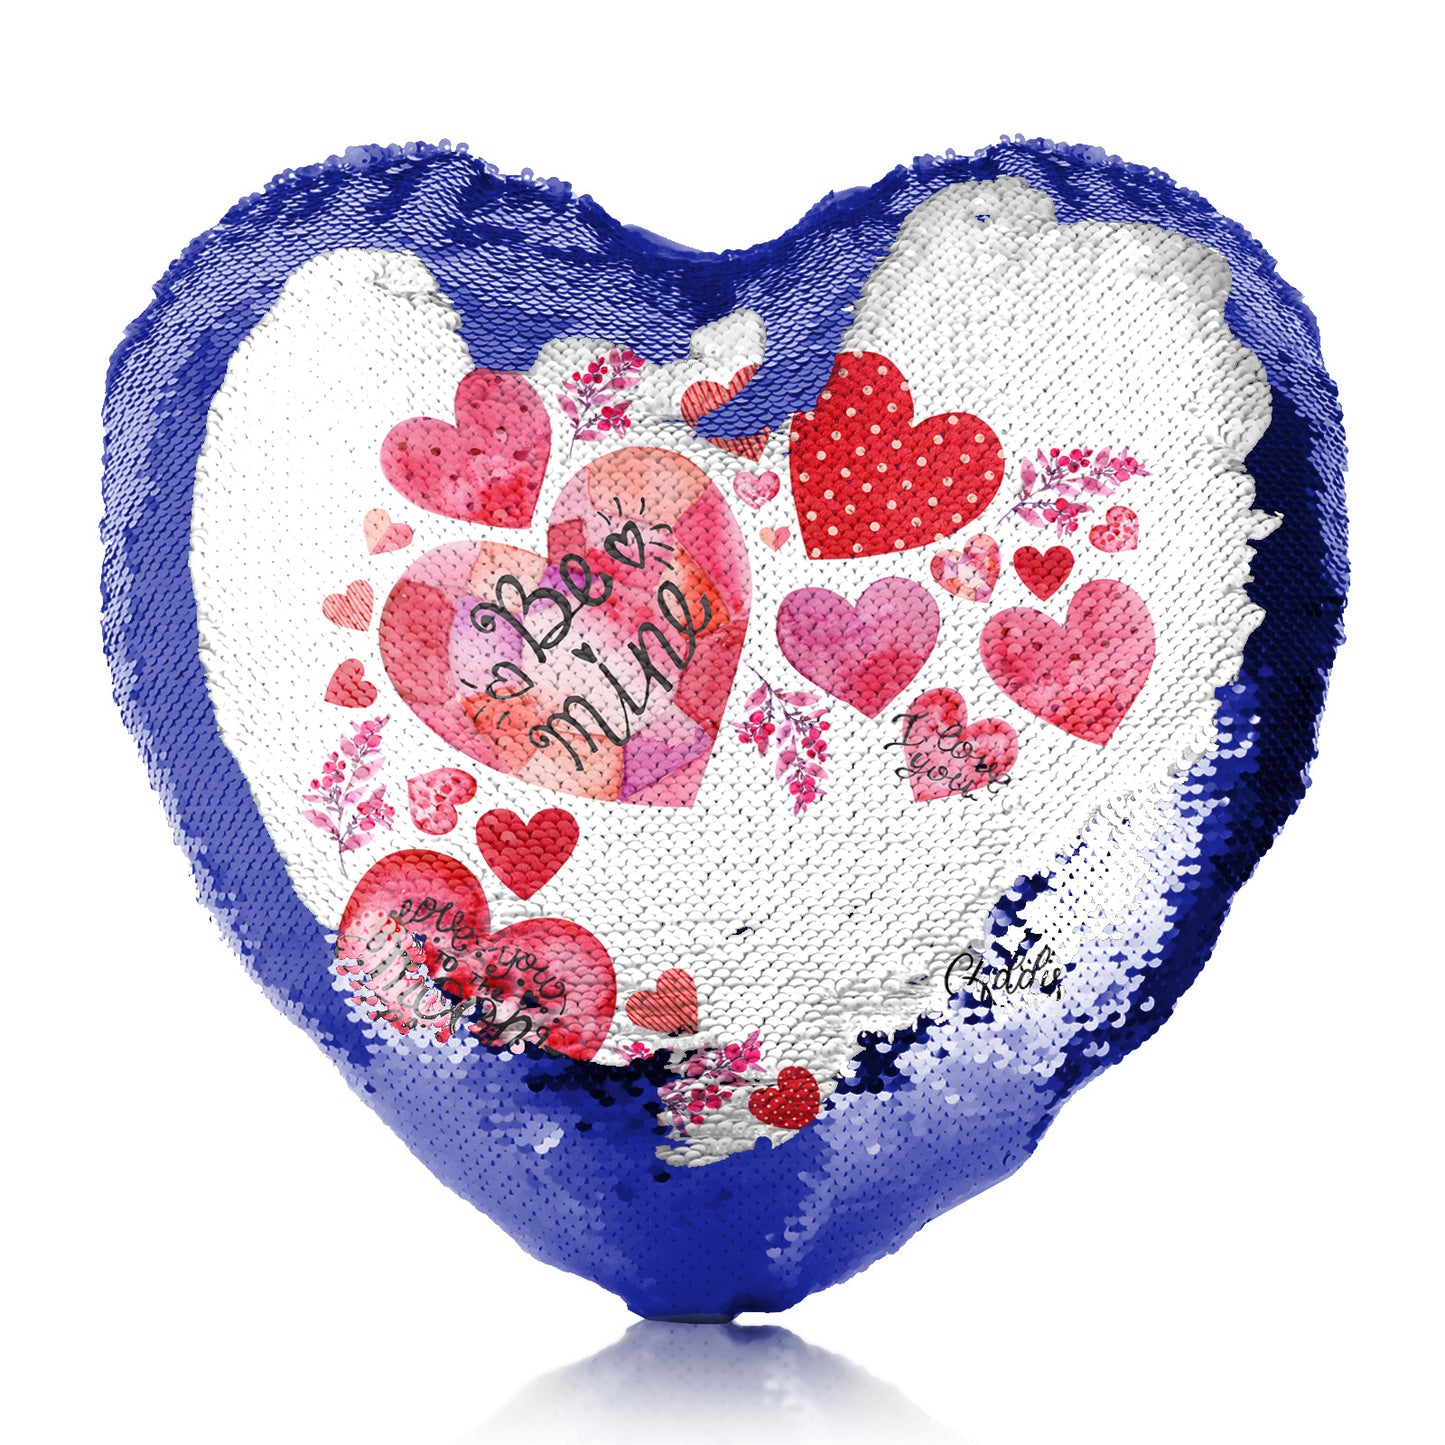 Personalised Sequin Heart Cushion with Stylish Text and Material Hearts Love Message Print